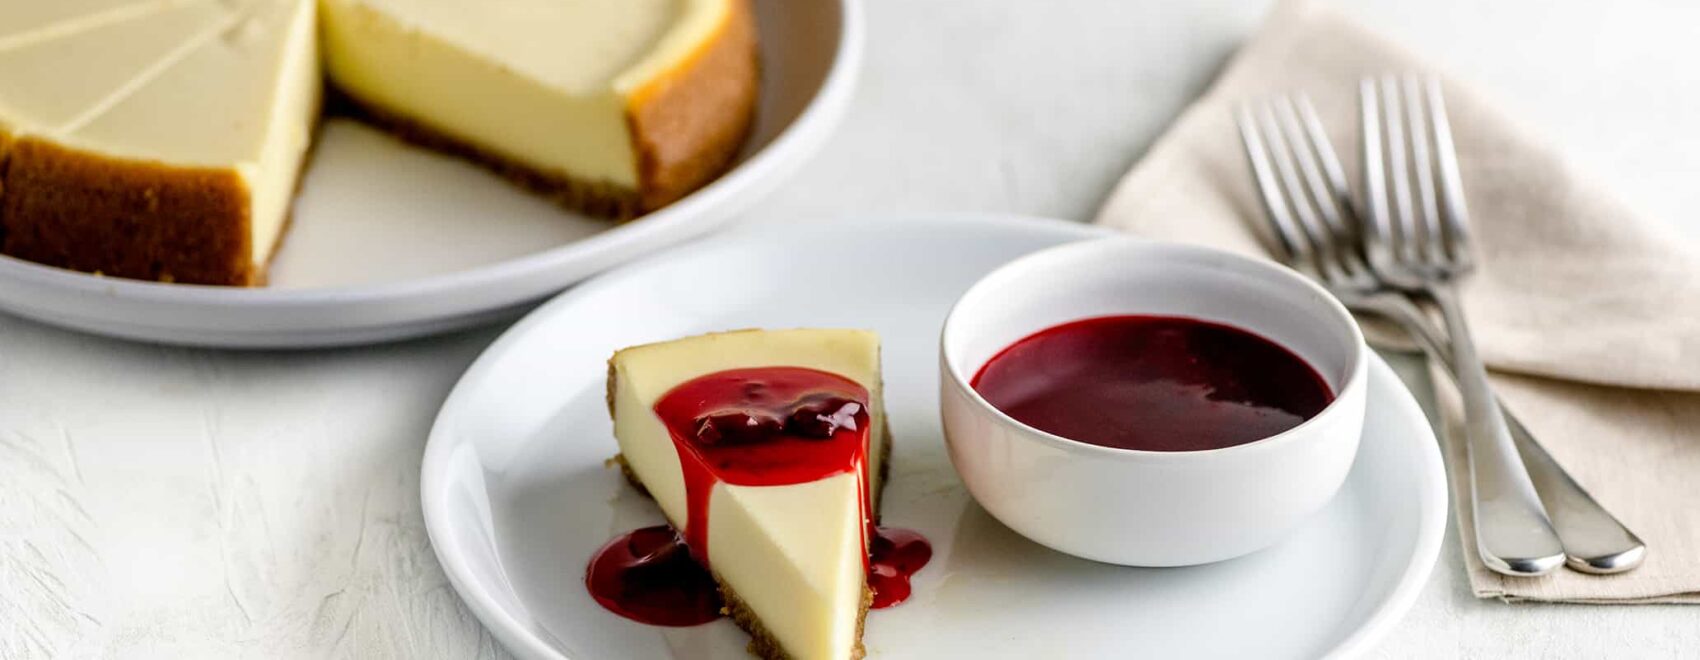 Homemade cheesecake on a white plate beside a small bowl of strawberry topping